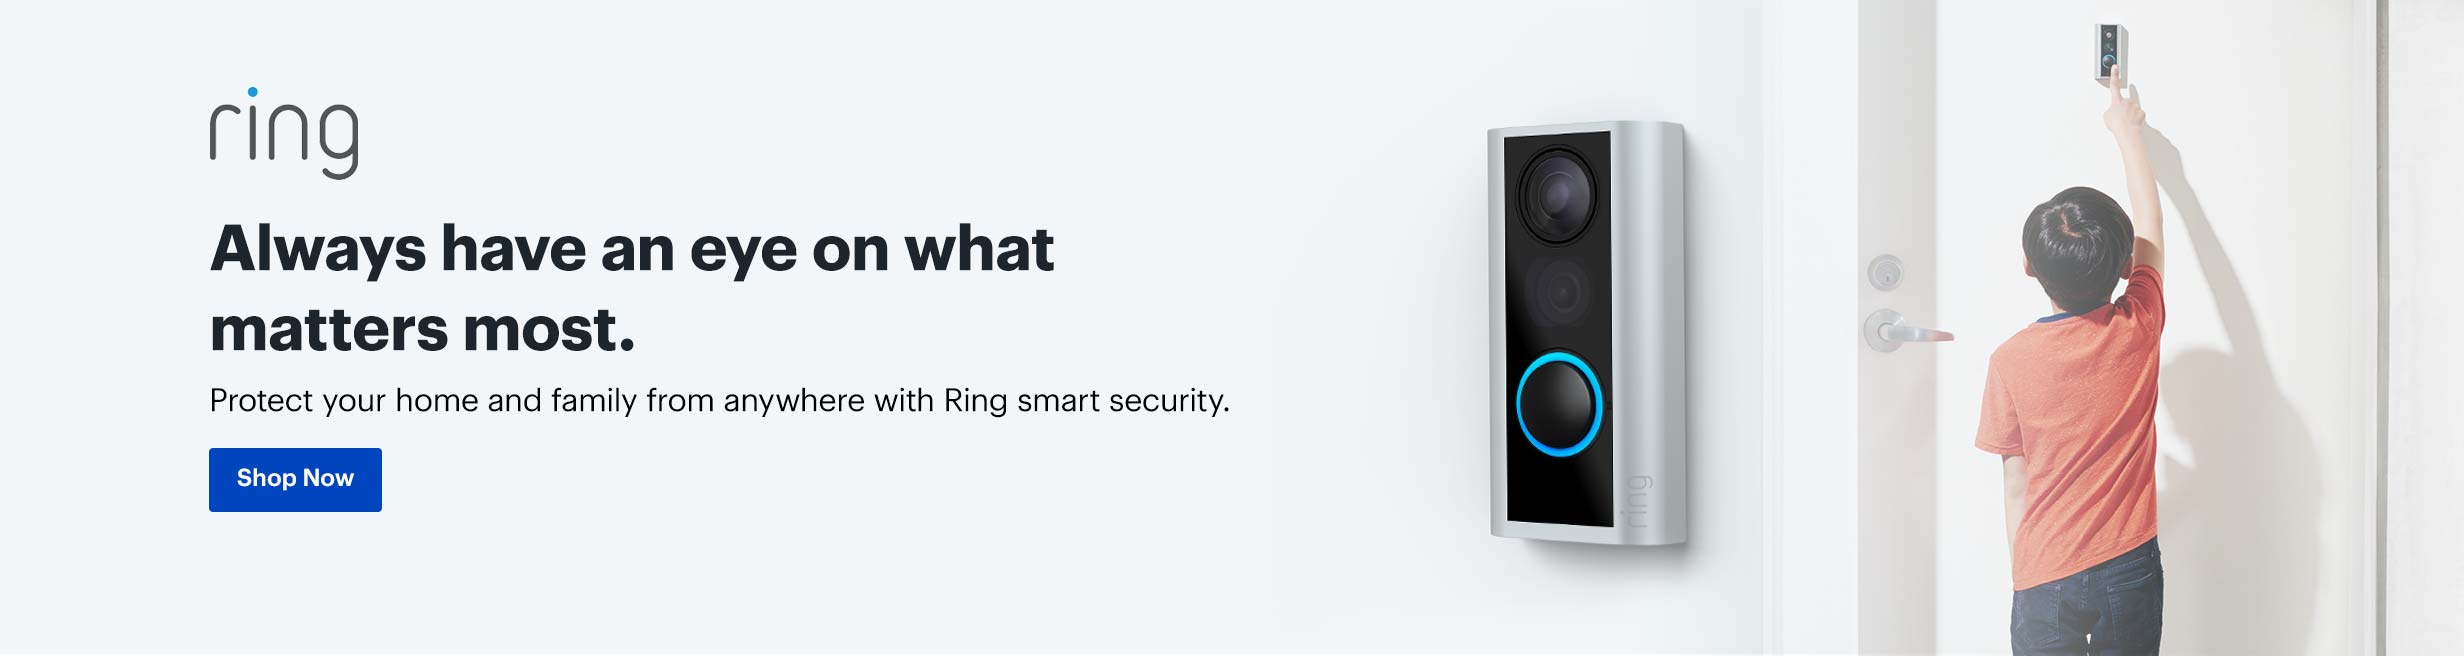 Ring Wireless Video Doorbell Chime Kit Remote Wi-Fi Access ADT Pulse,Ring,Samsun